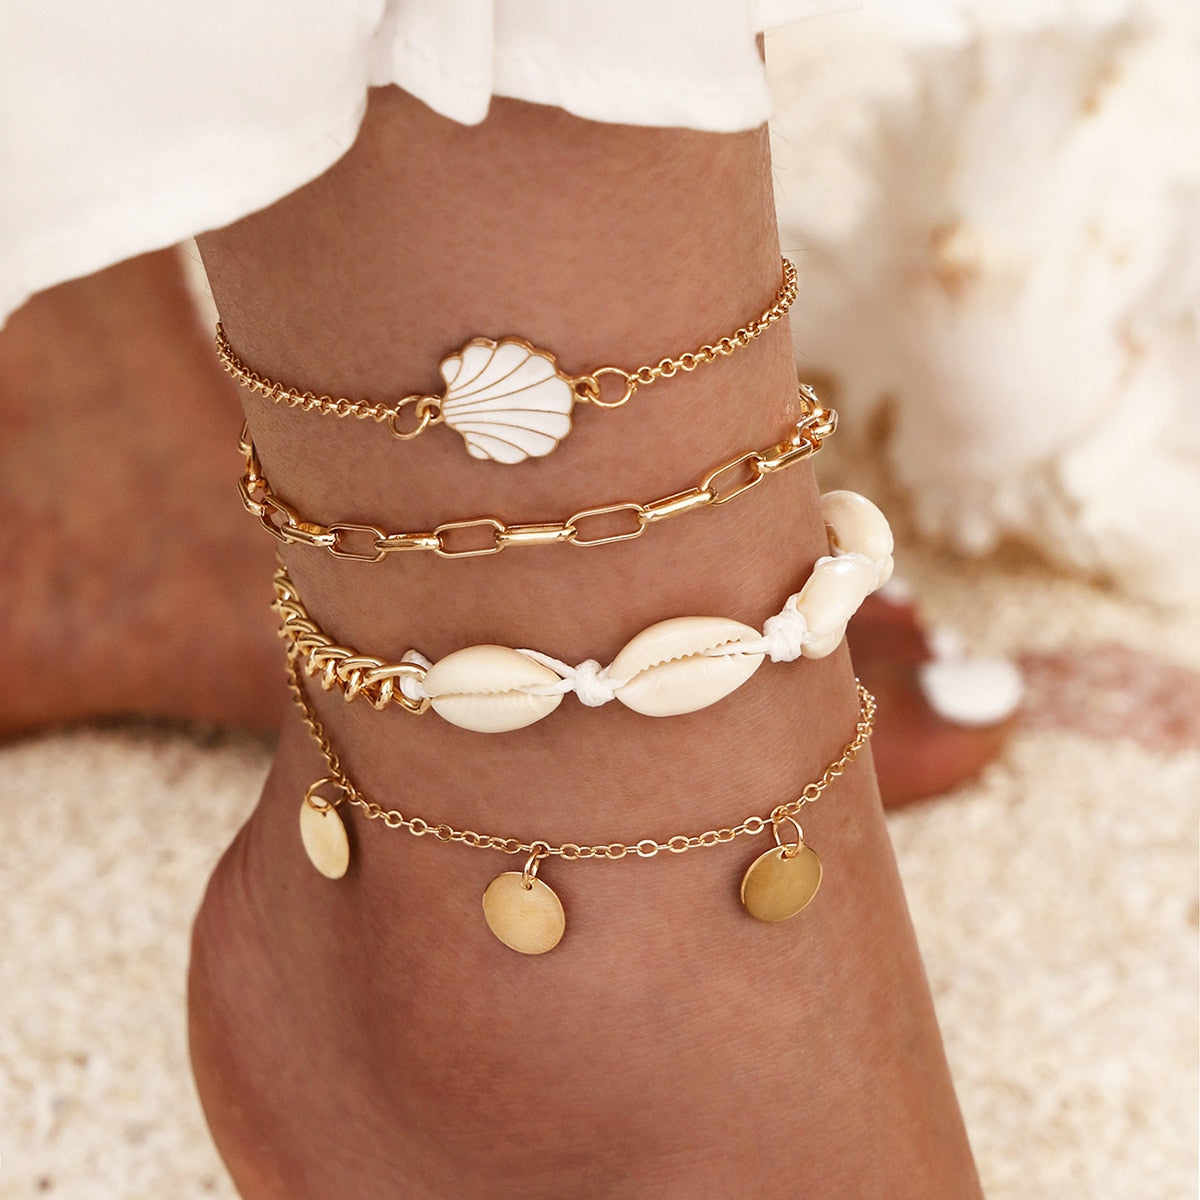 Bohemia Shell Star Chain Ankle Bracelet On Leg Foot Jewelry Boho Starfish key butterfly Charm Anklet Set For Women Accessories